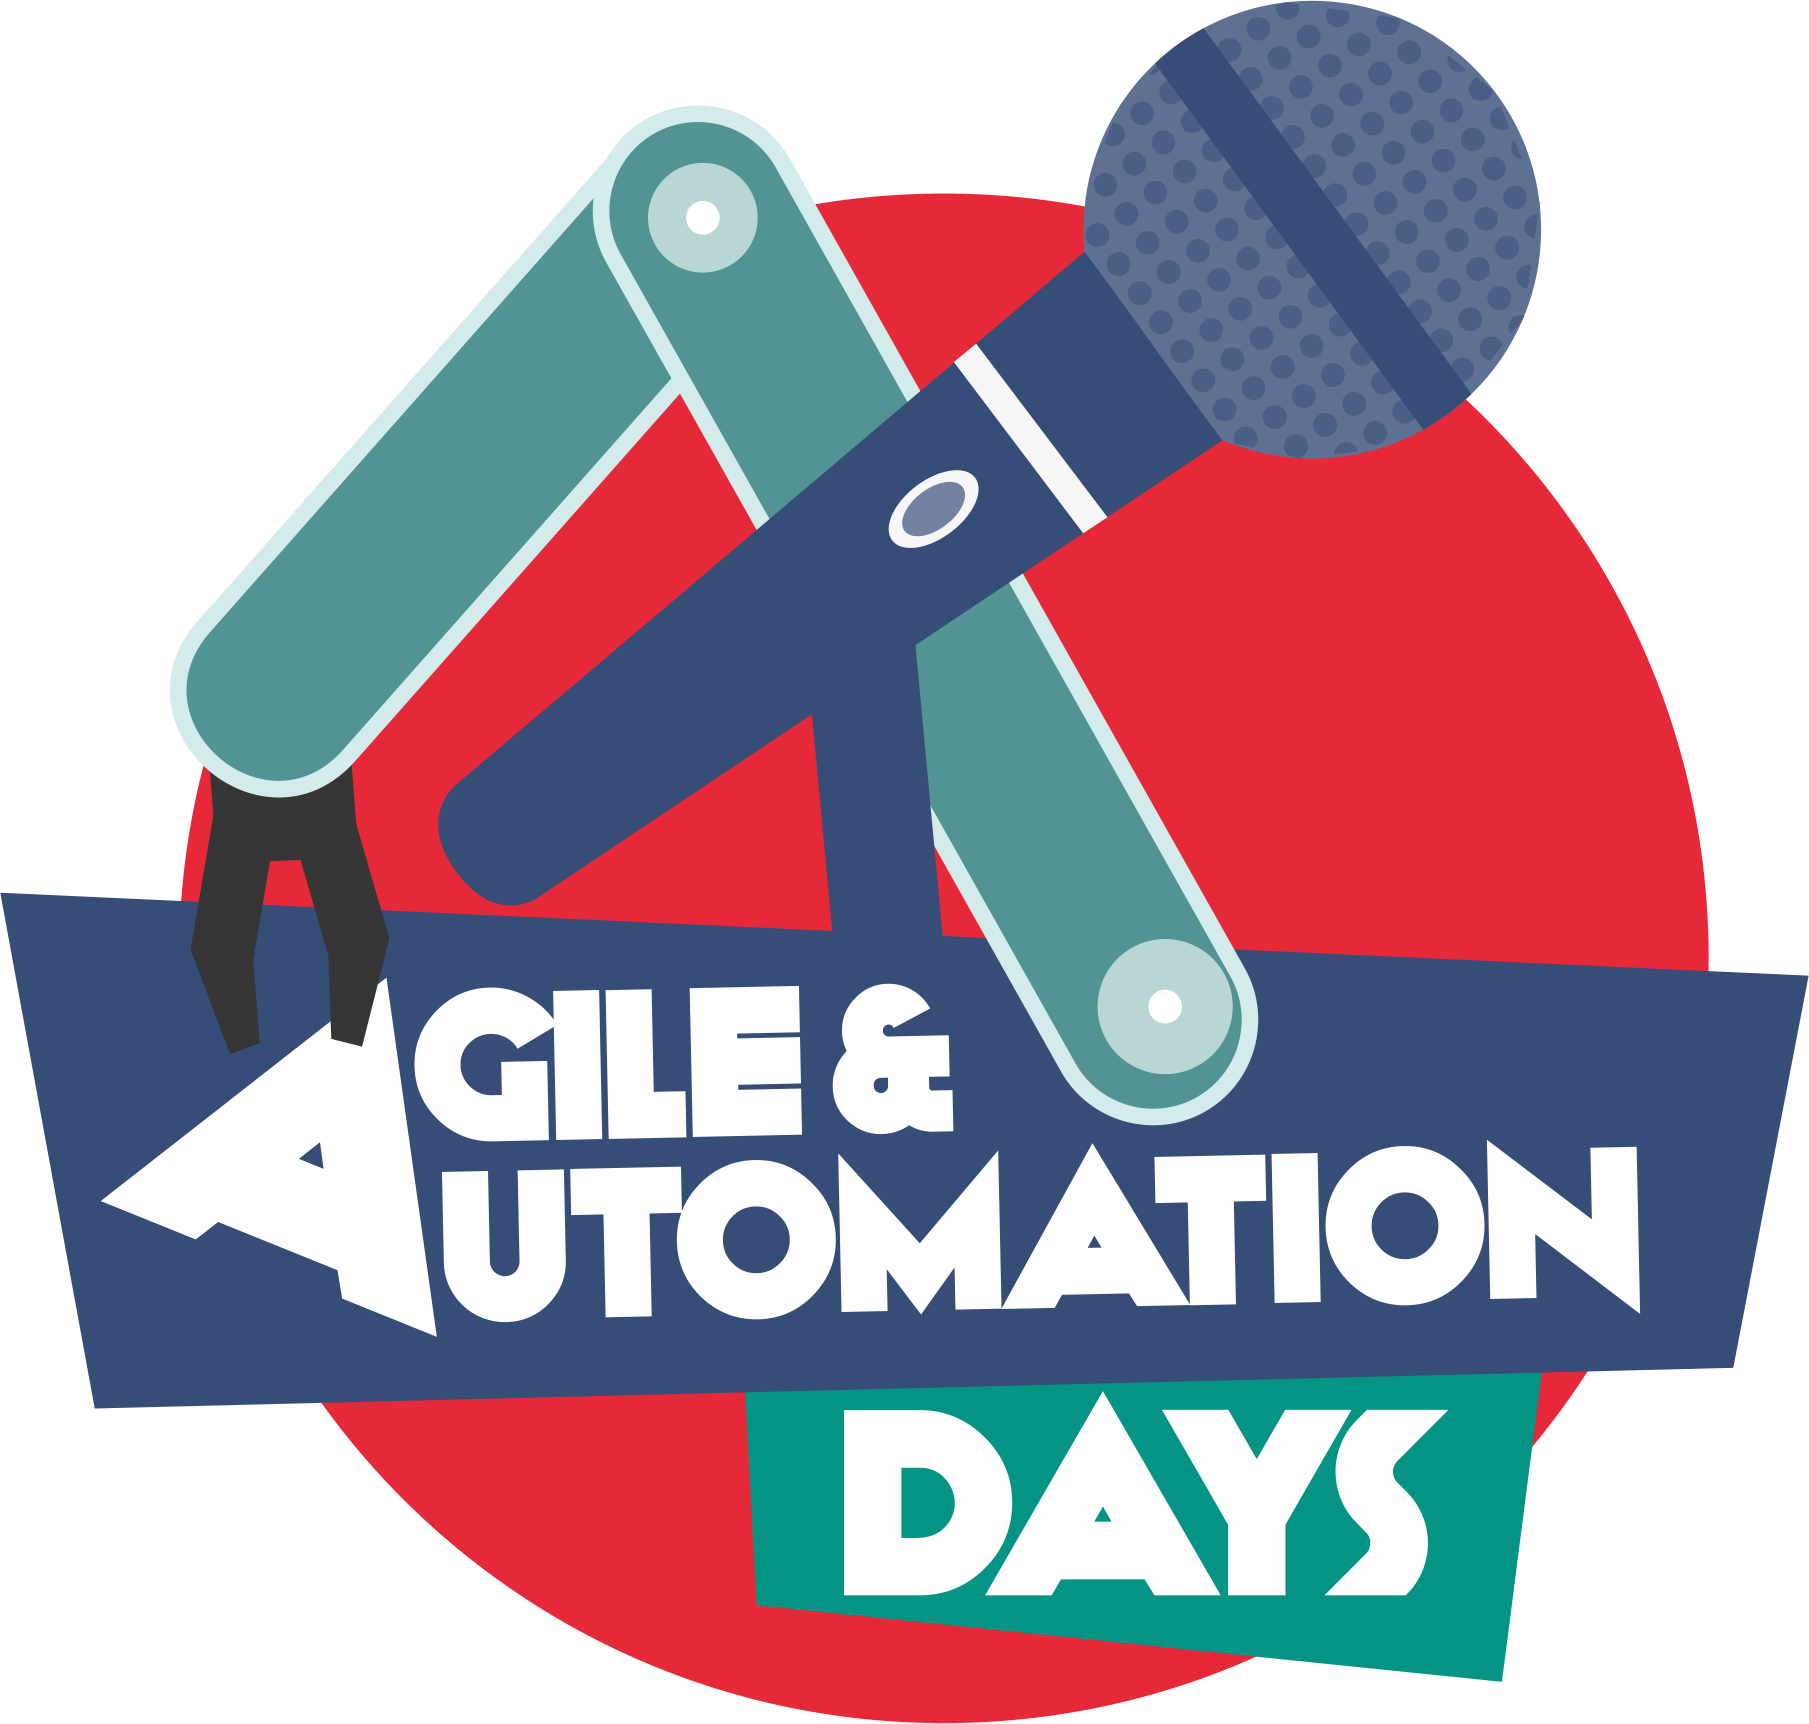  Agile and Automation Days 2017 